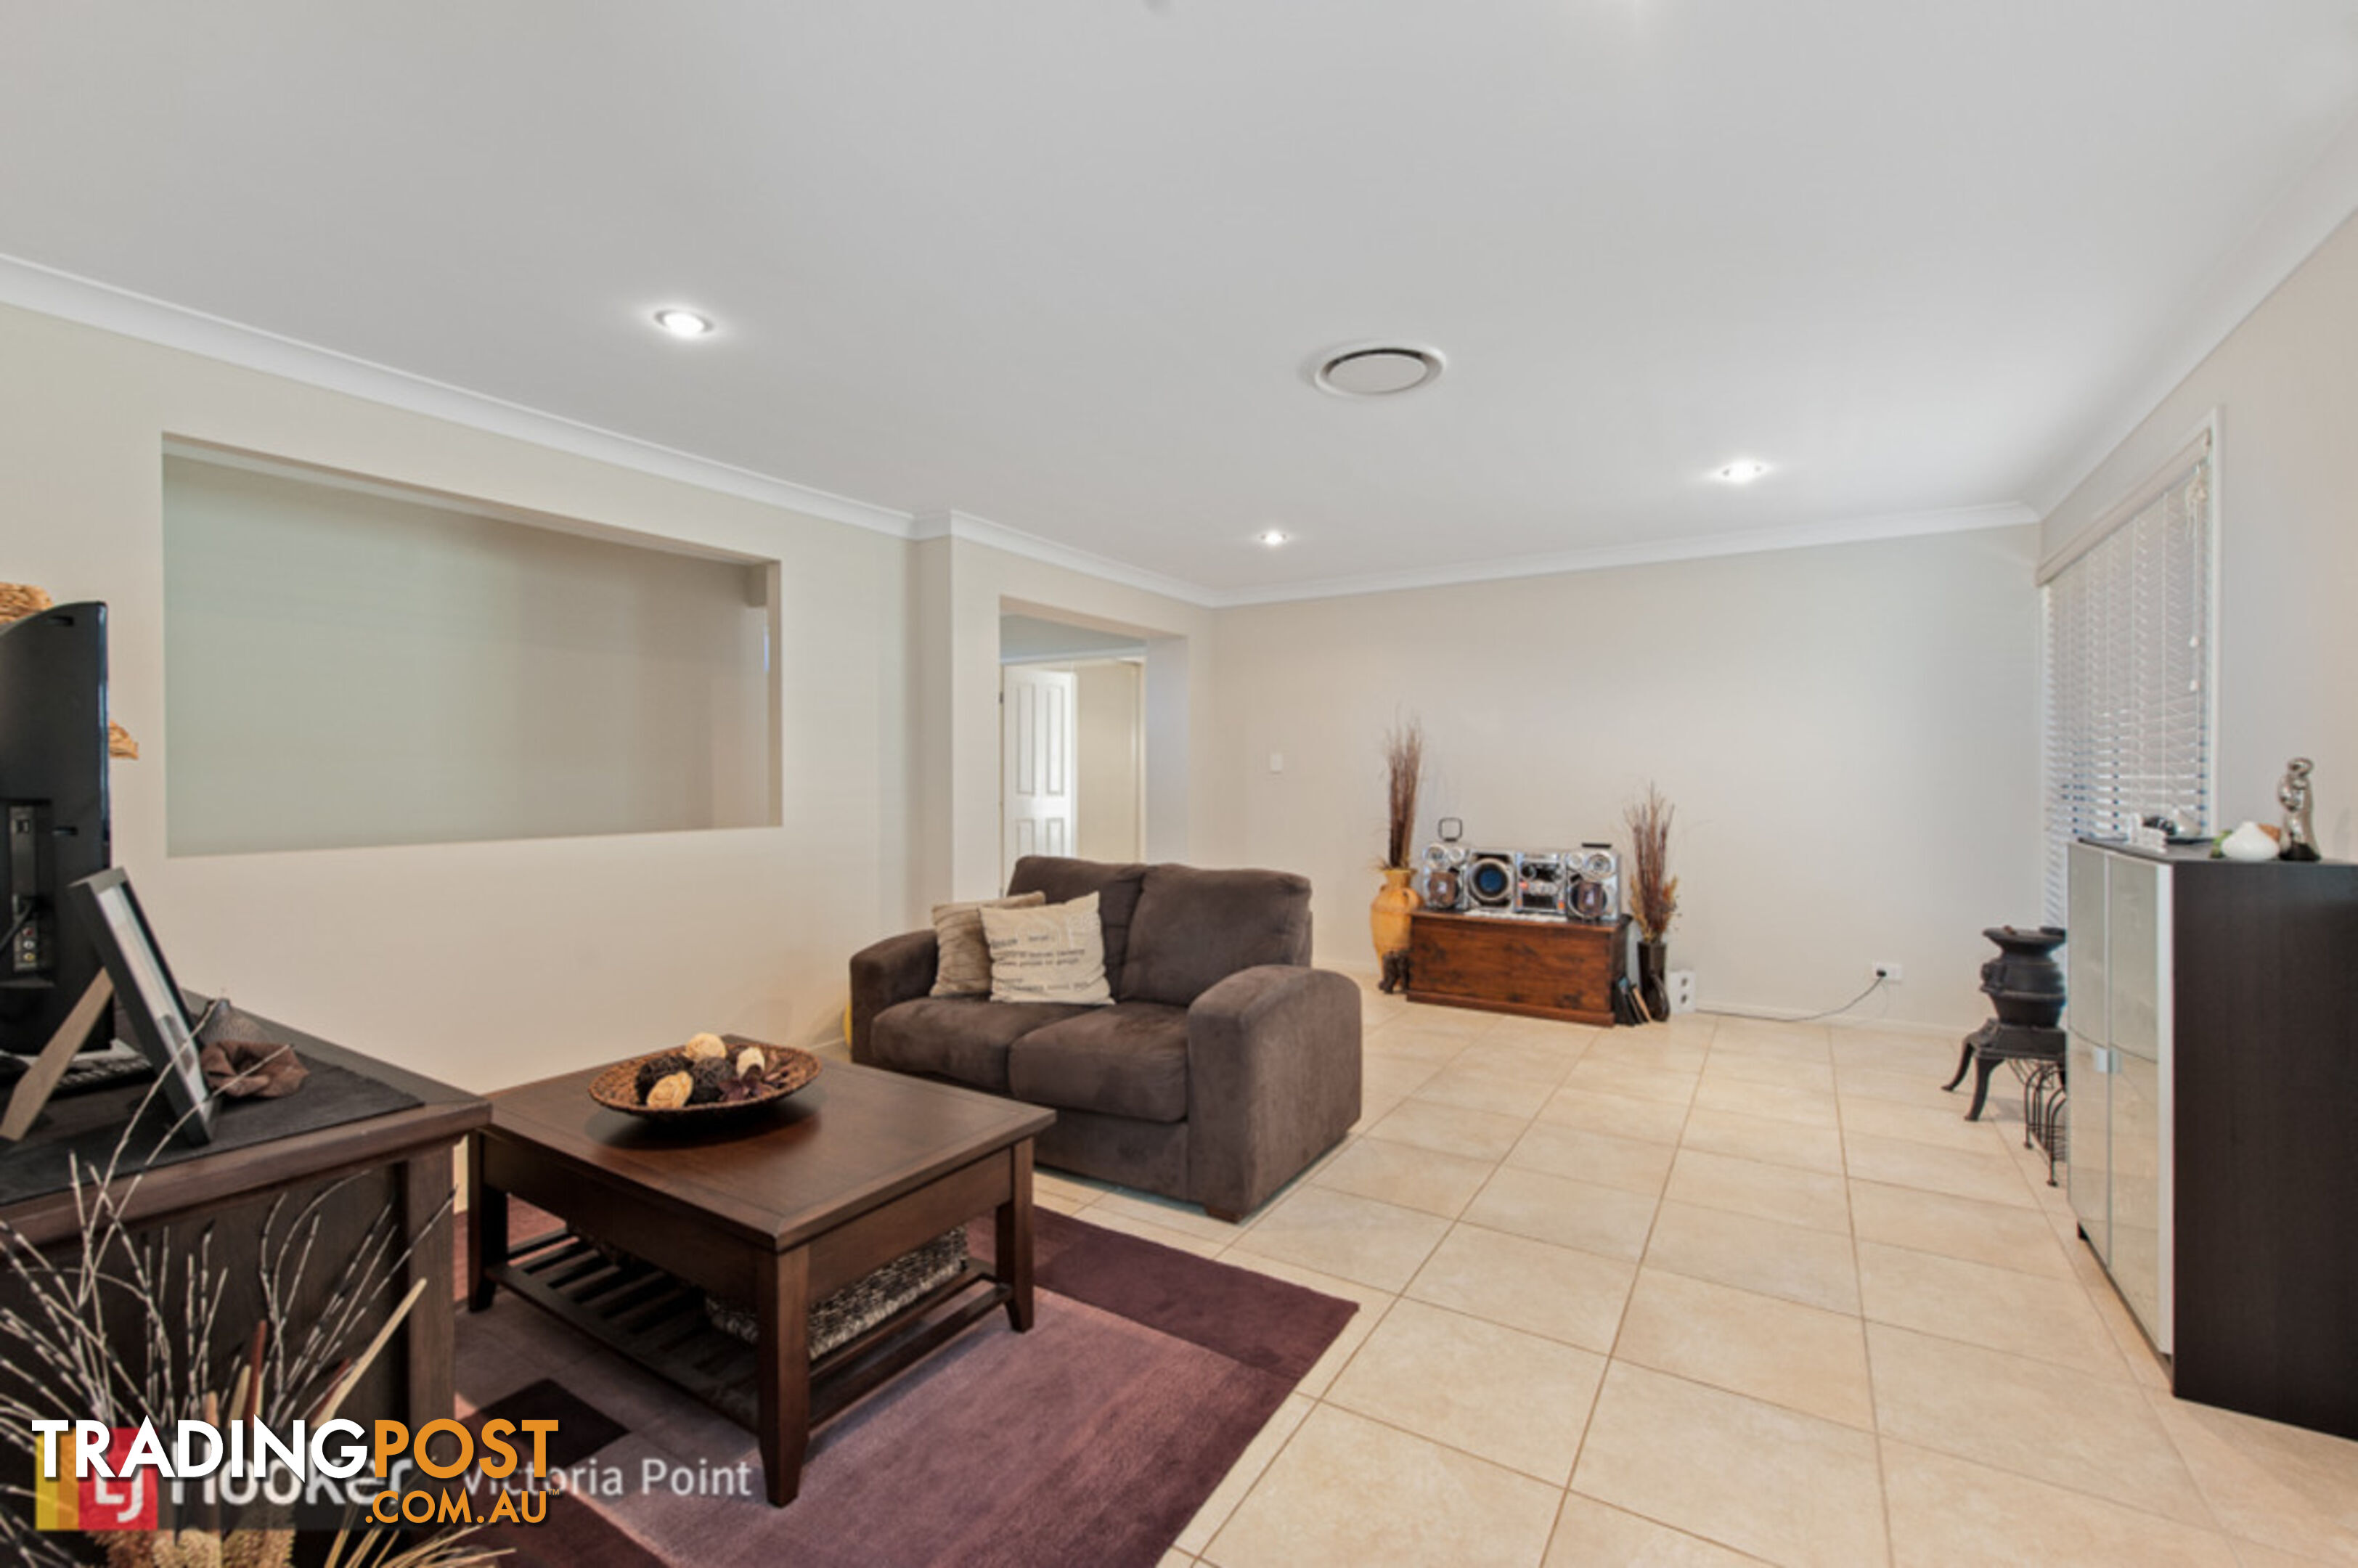 37 Waterville Drive THORNLANDS QLD 4164